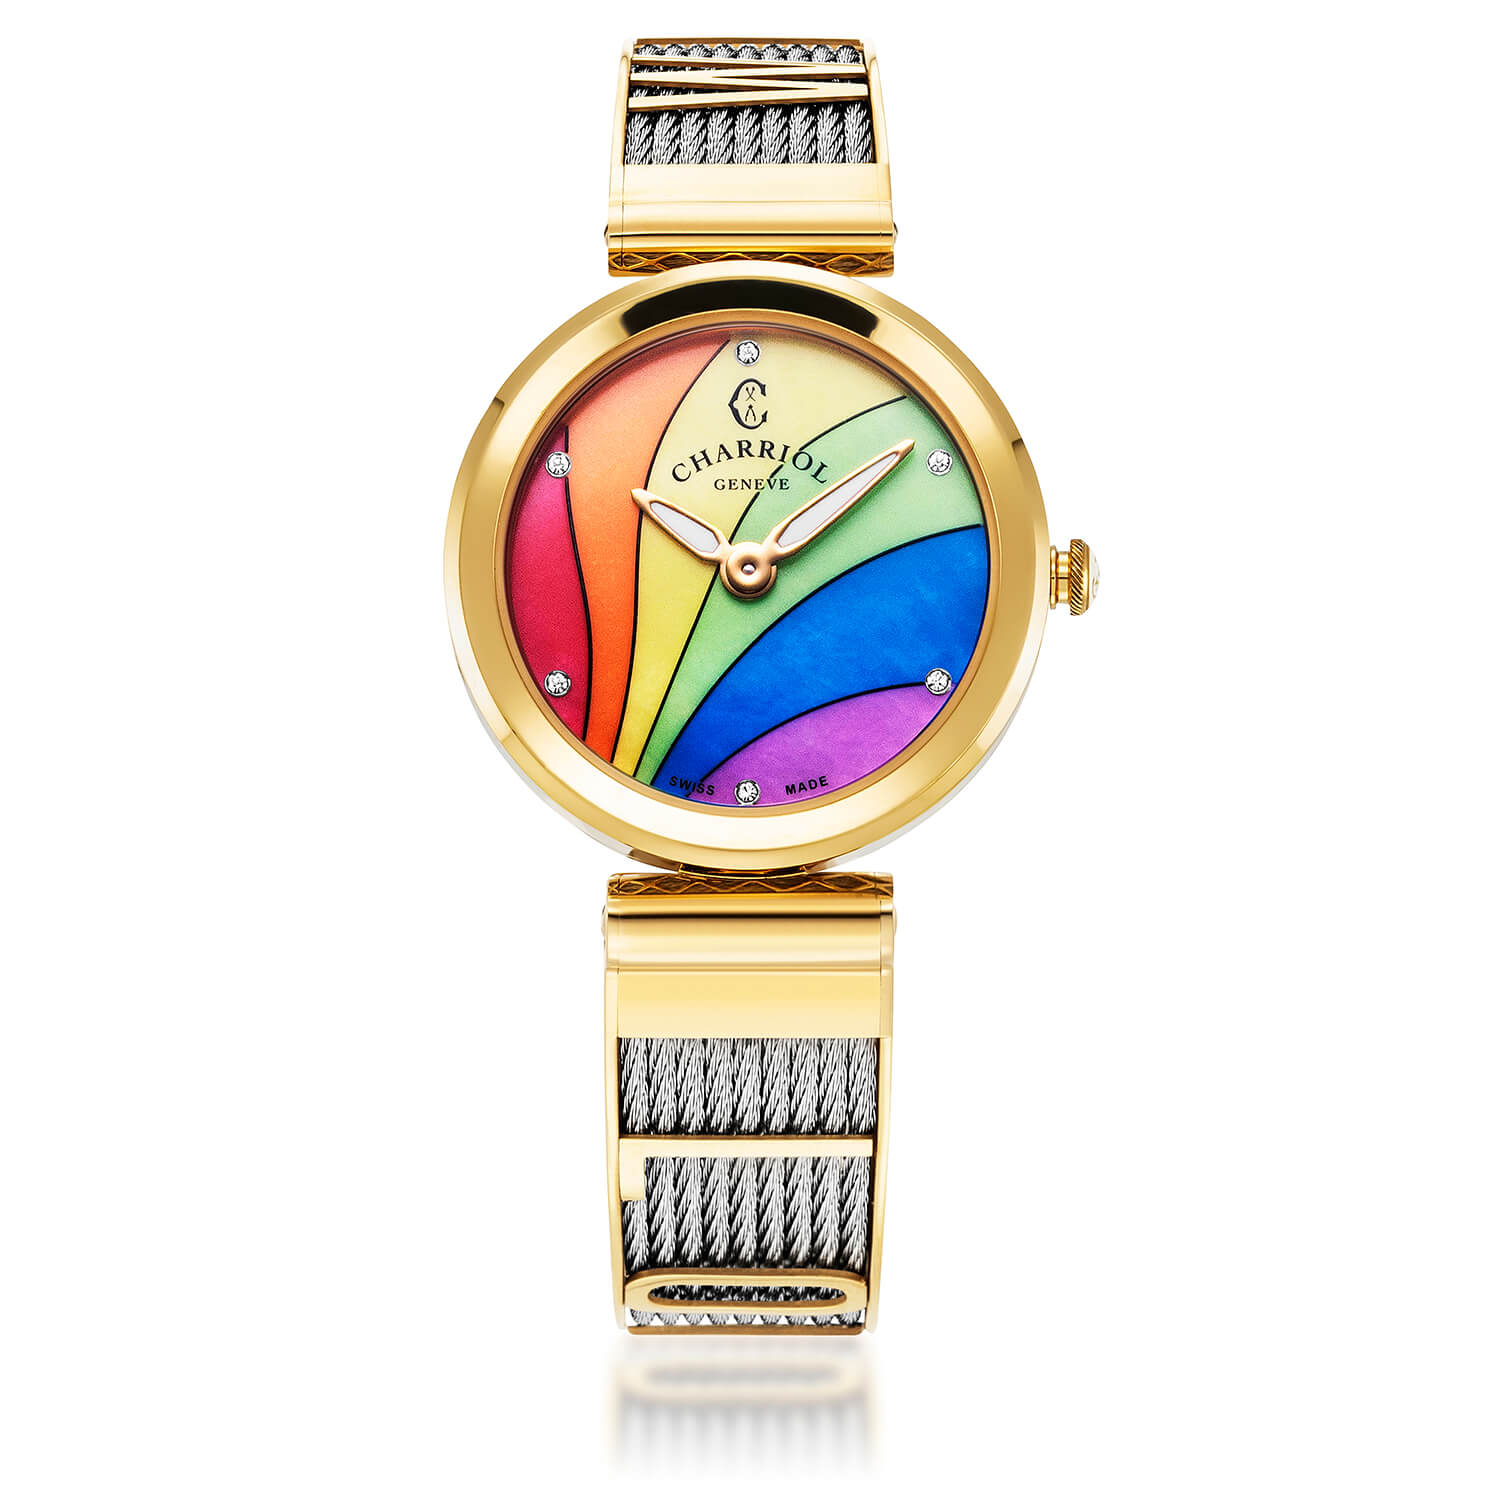 FOREVER YOURS, 32MM, QUARTZ CALIBRE, RAINBOW WITH 6 ZIRCONIAS DIAL, STEEL YELLOW GOLD PVD BEZEL, STEEL CABLE BRACELET - Charriol Geneve -  Watch